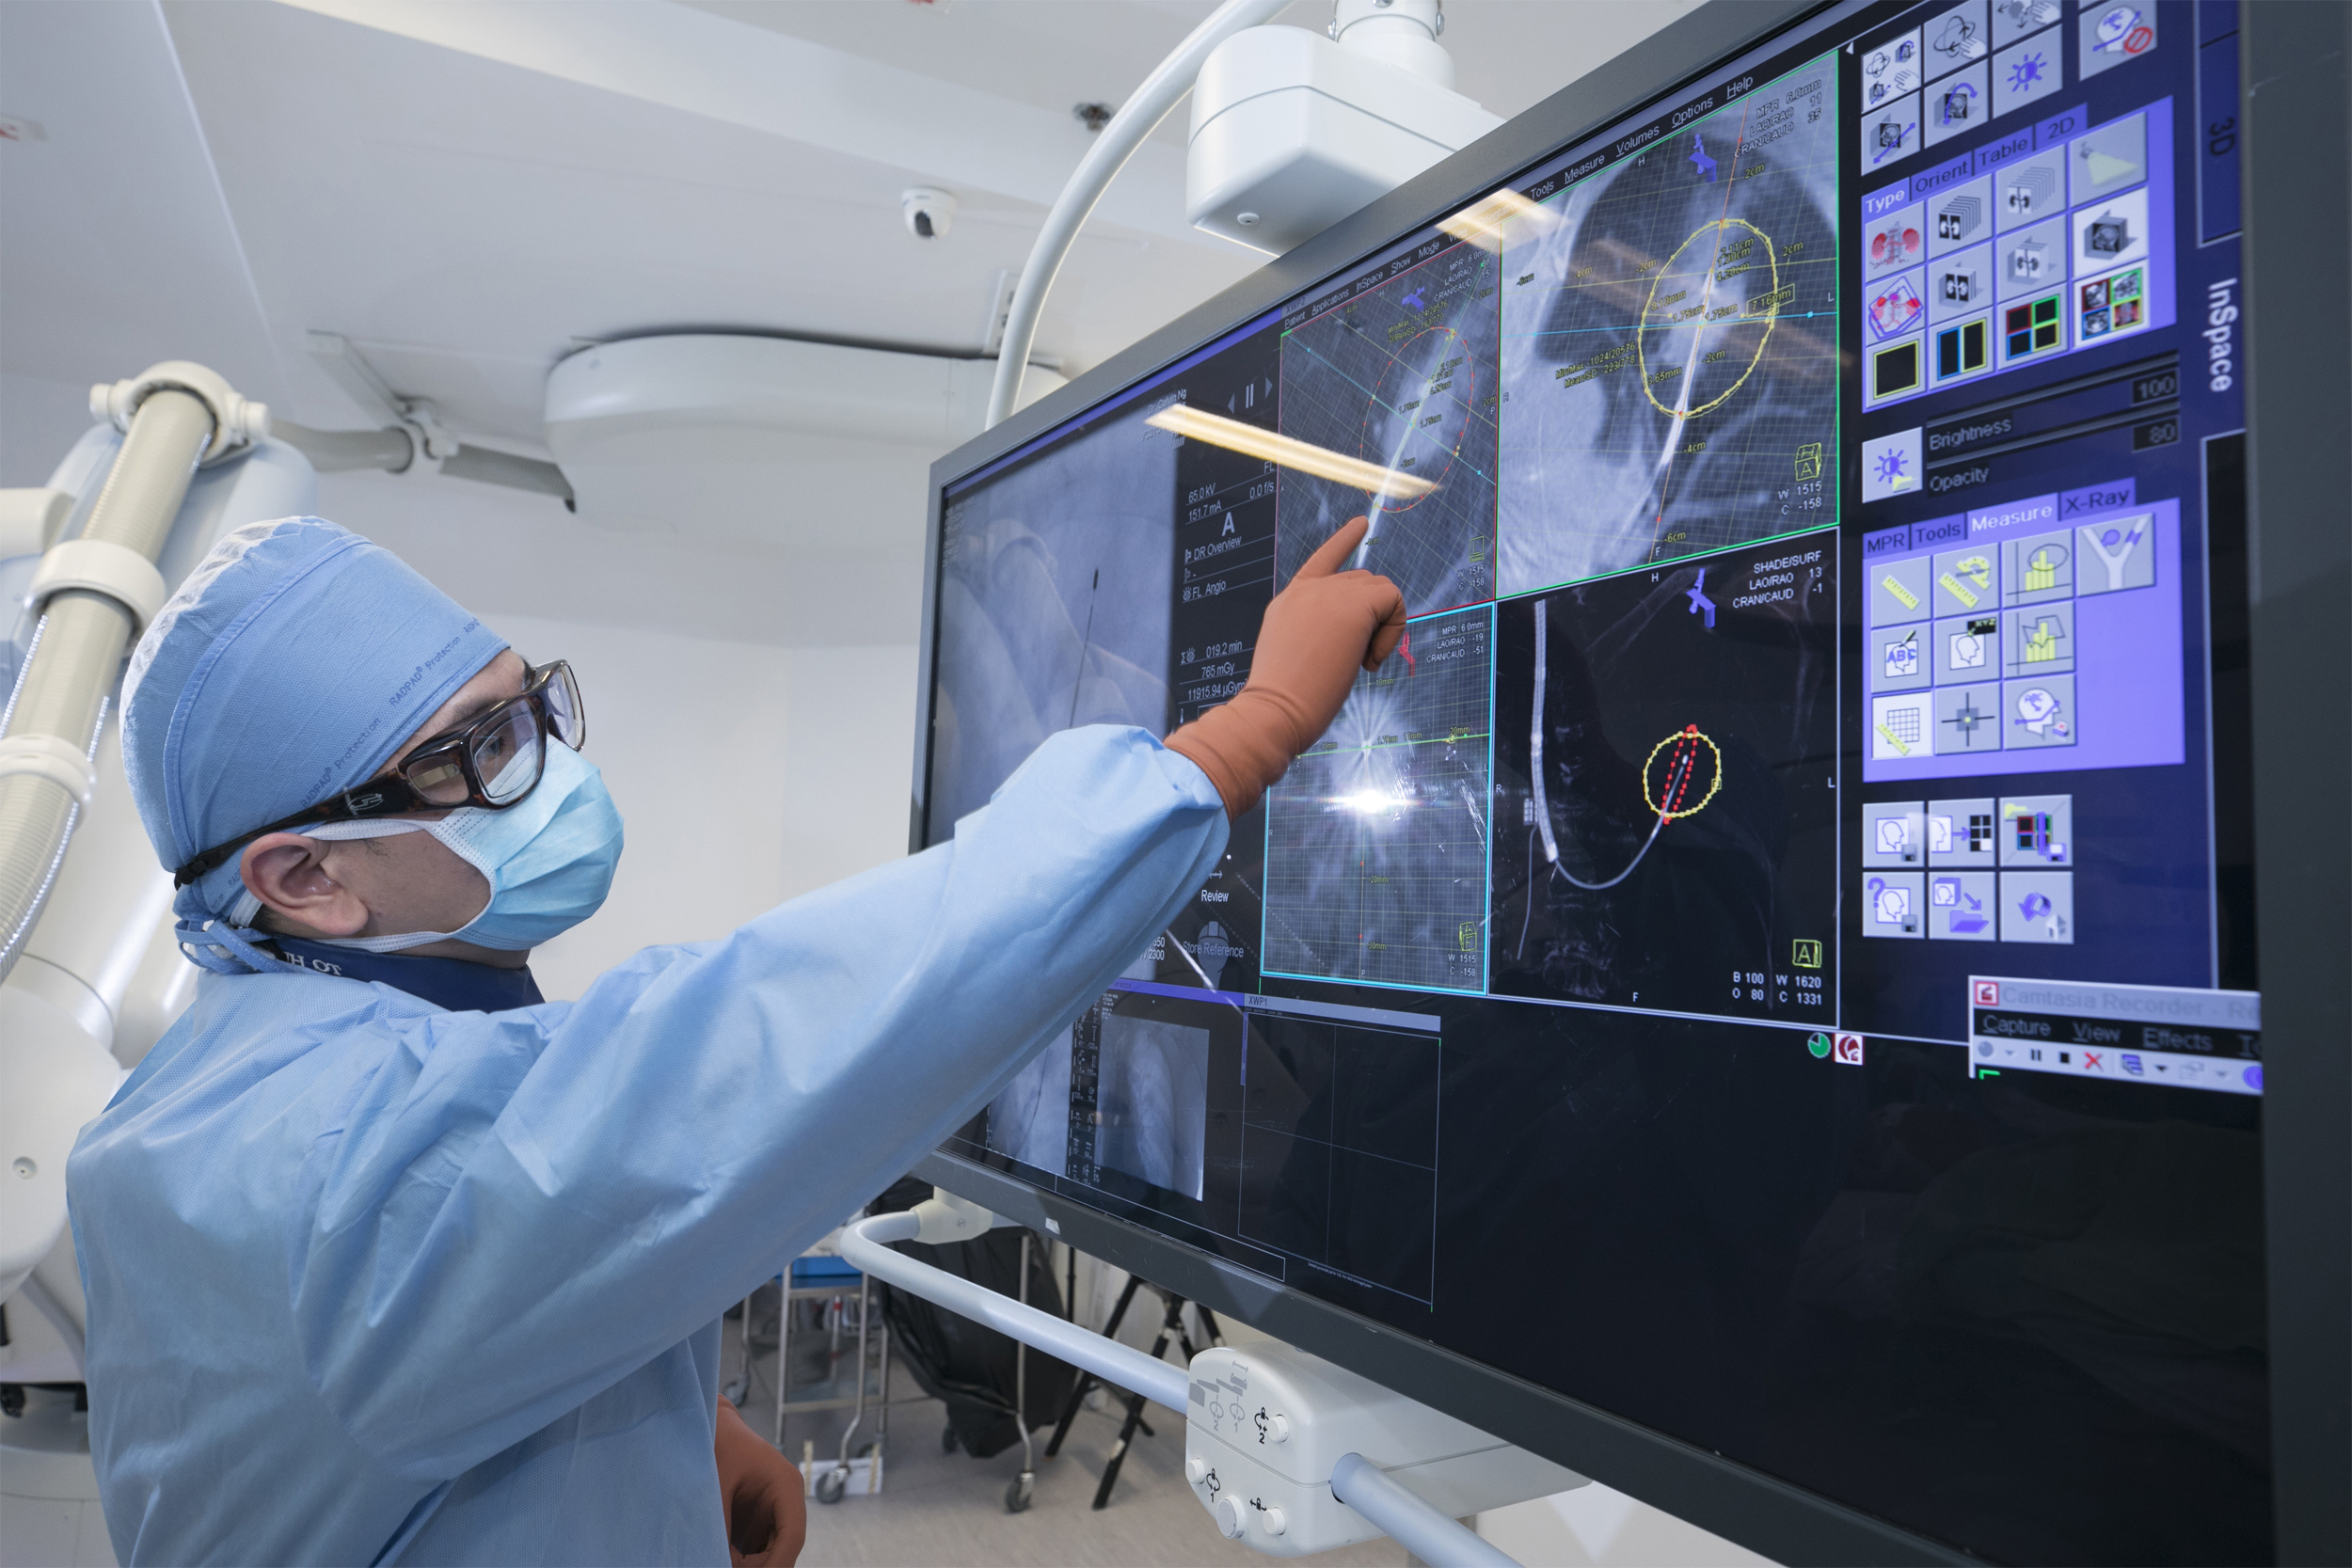 The actual scene showing BMA of lung tumours in the hybrid operating room. The photo shows the confirmation of adequate ablation of cancer cells through advanced evaluation of CT images.